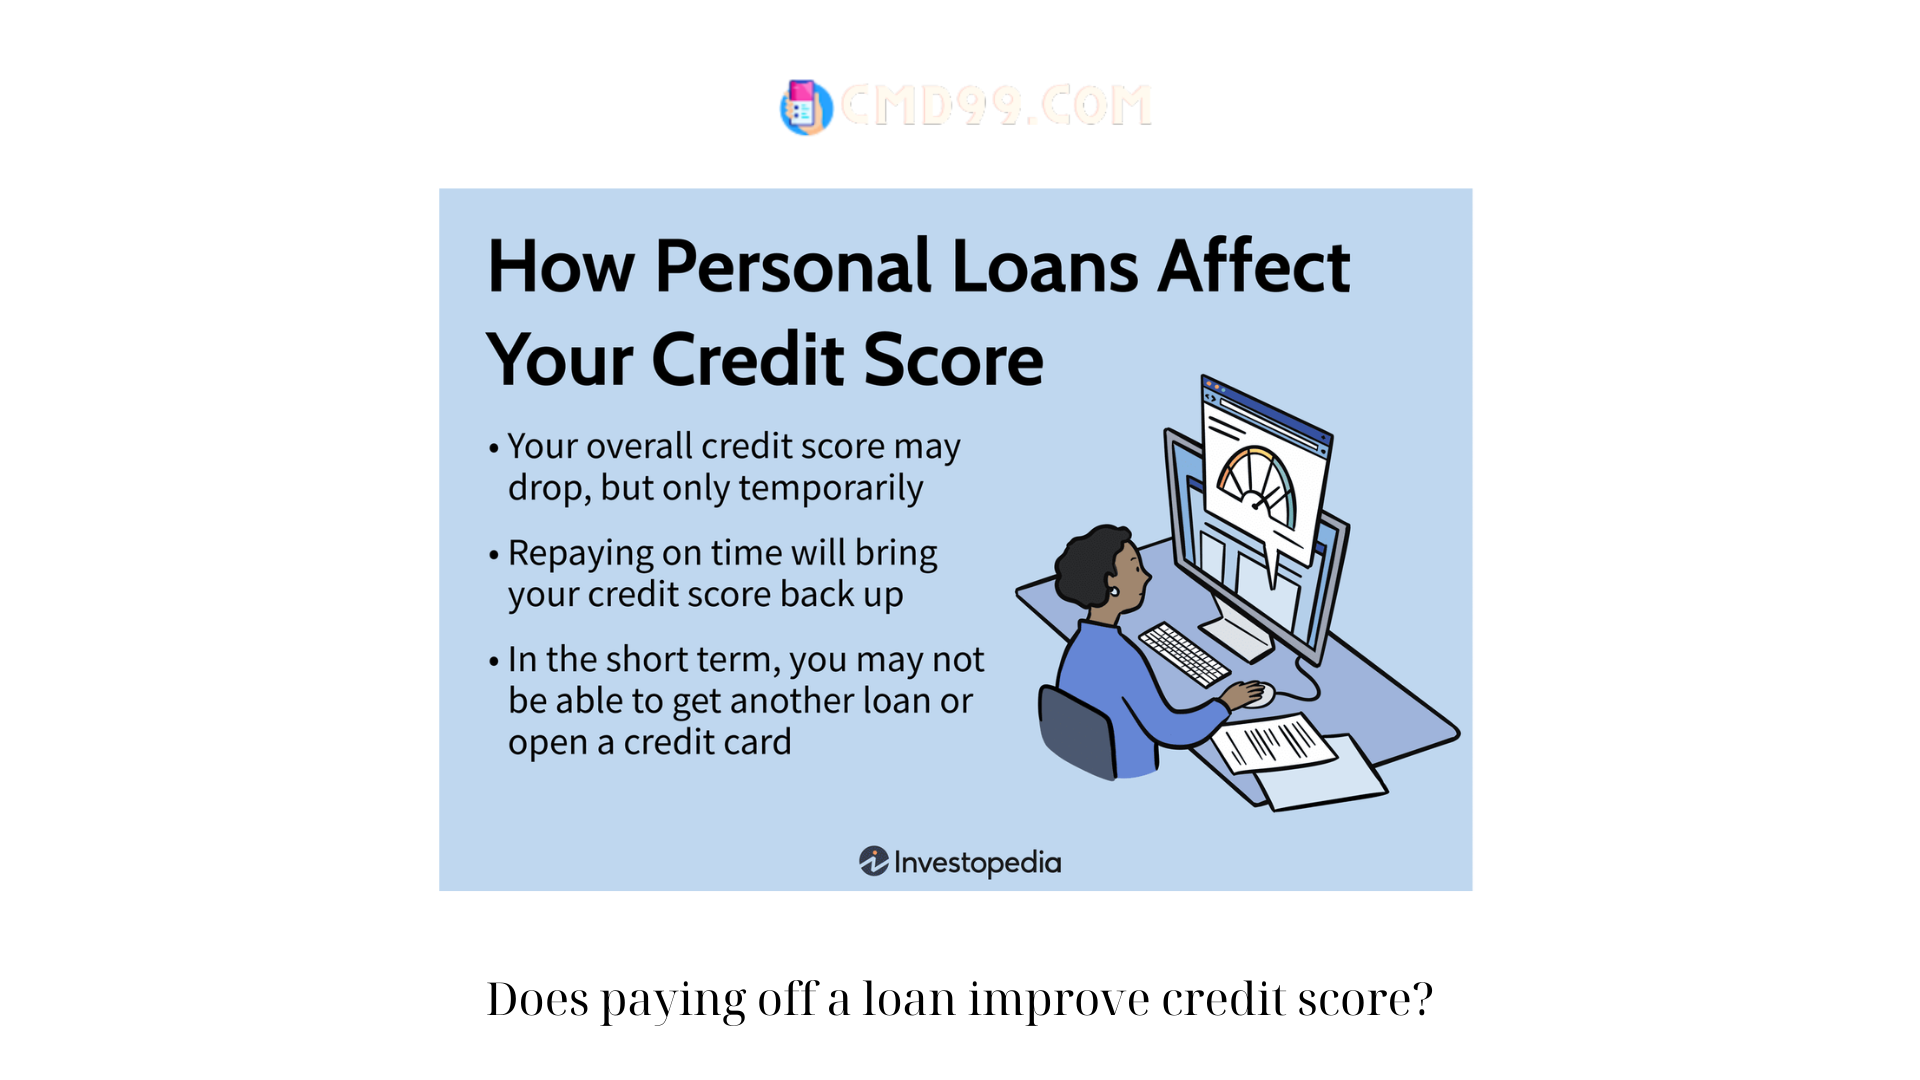 Does paying off a loan improve credit score